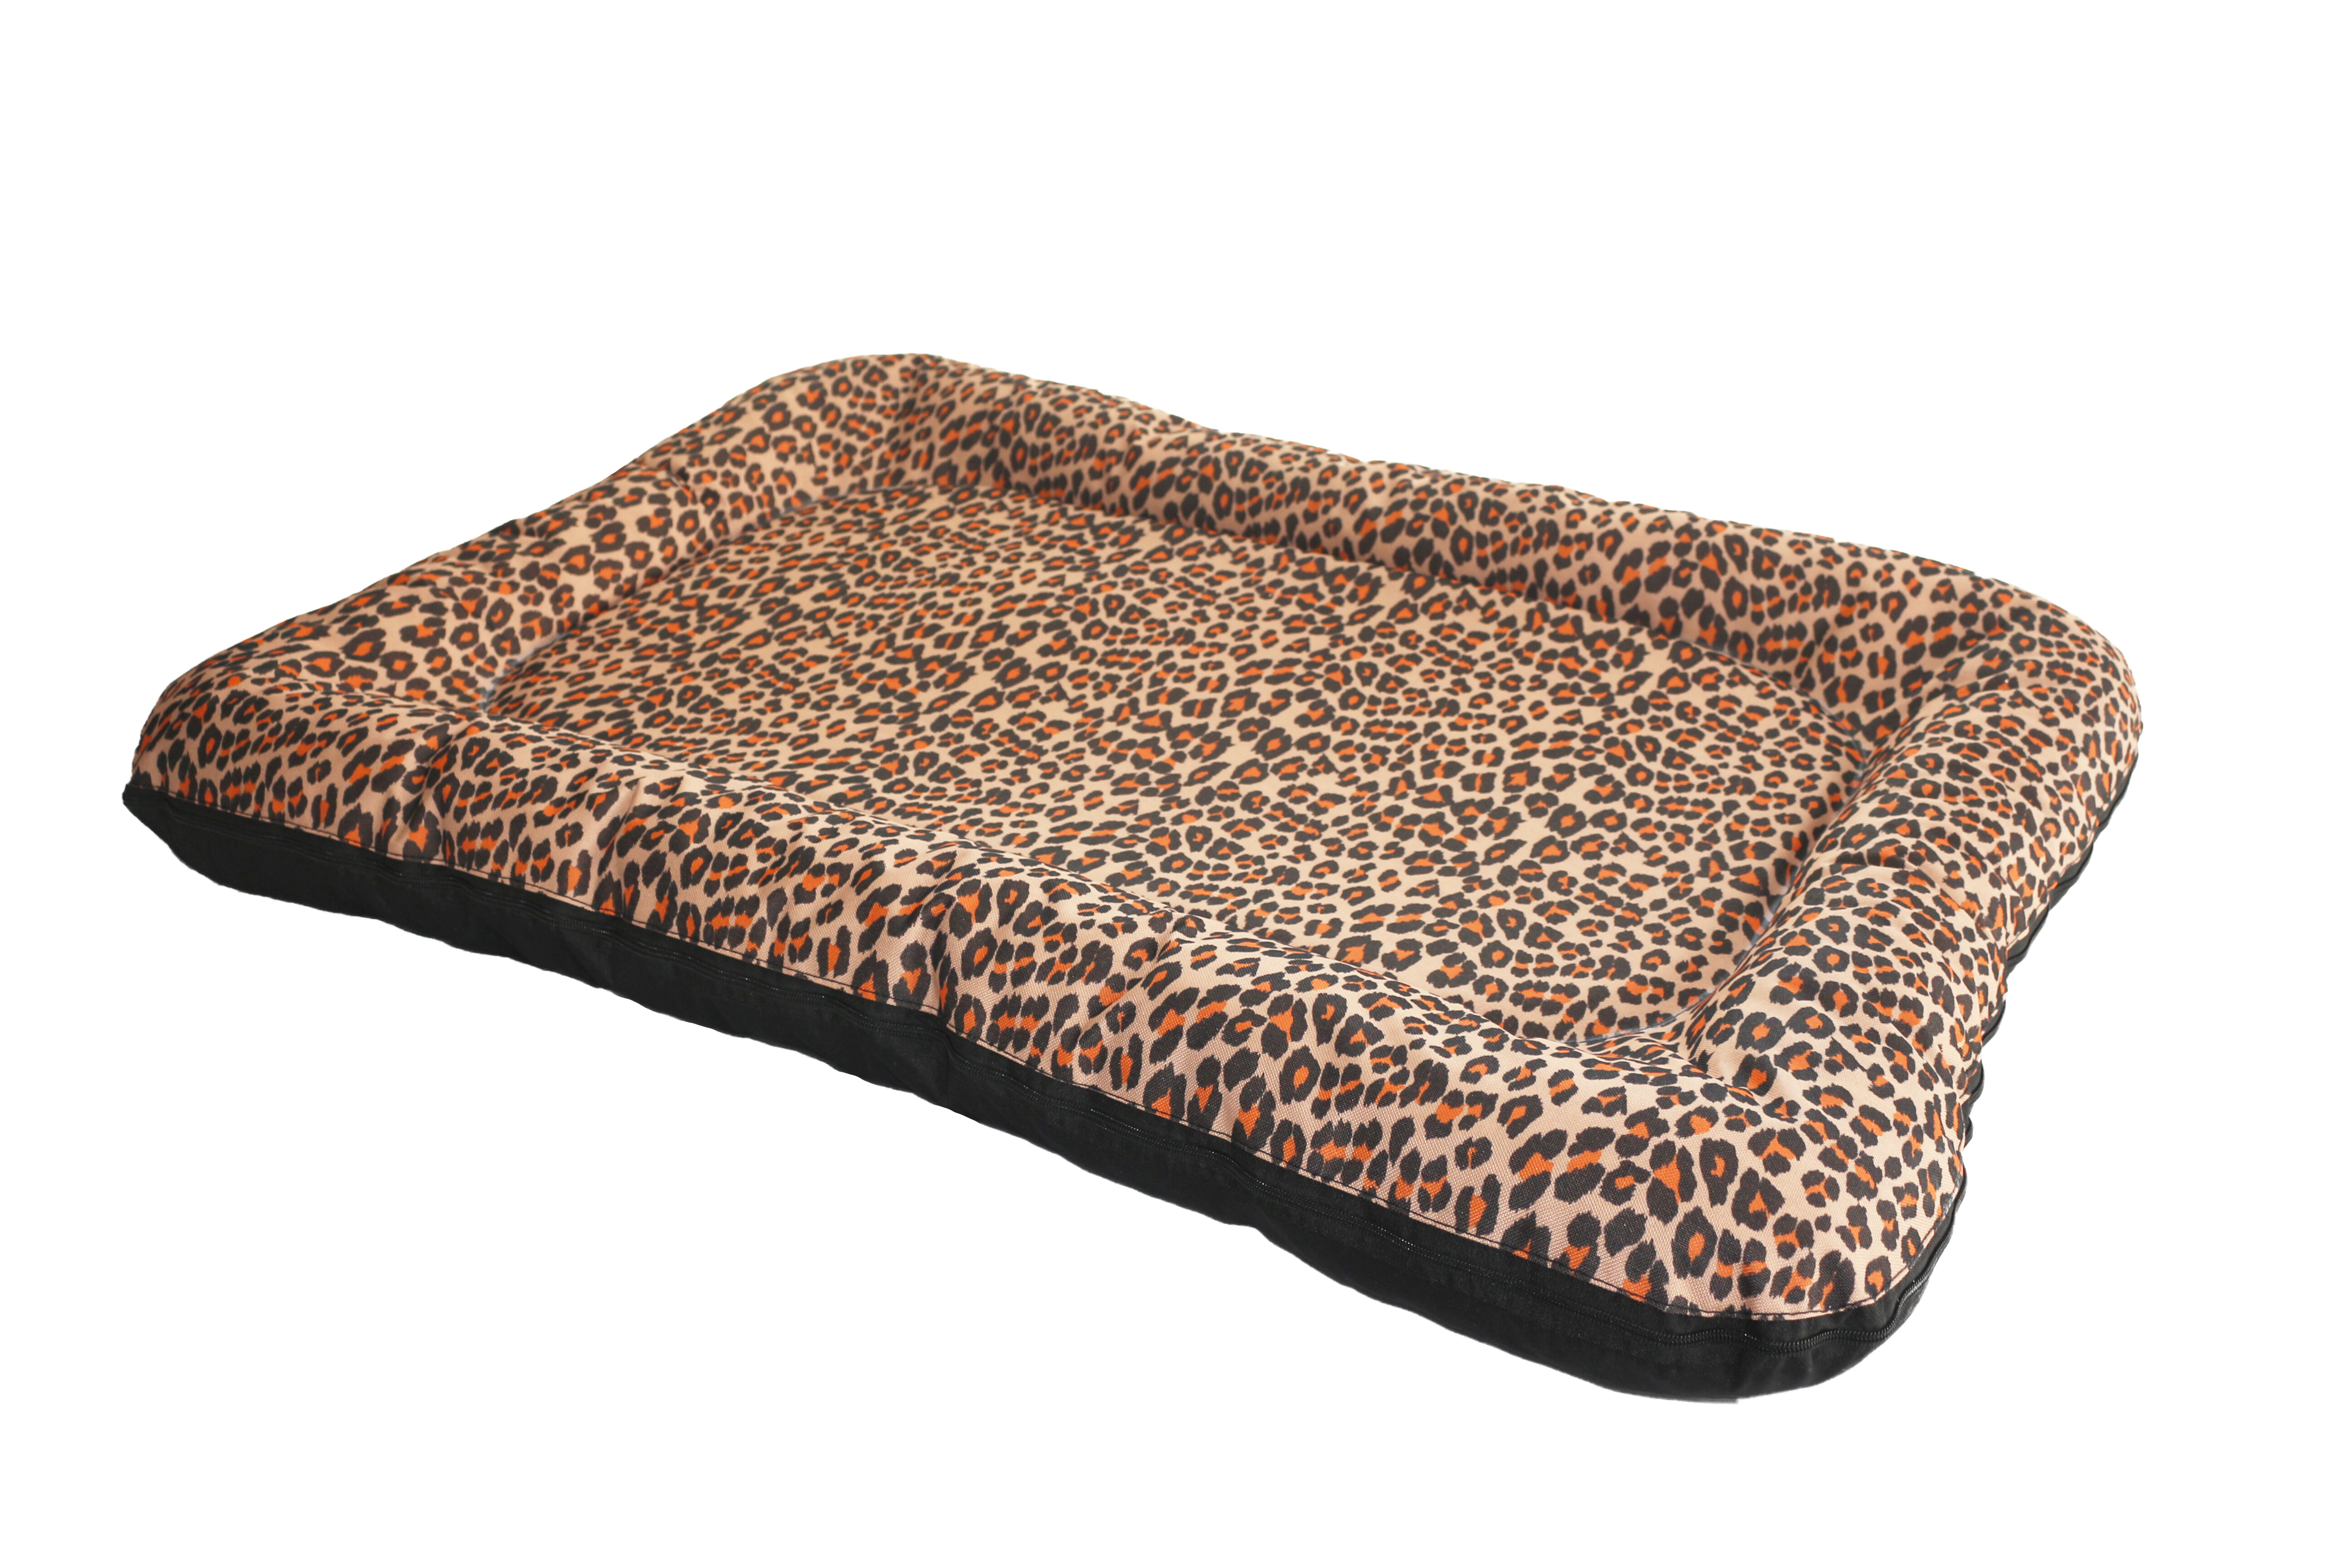 Rajen mattress for dogs, 6 sizes from 64x40 cm, motif P-25